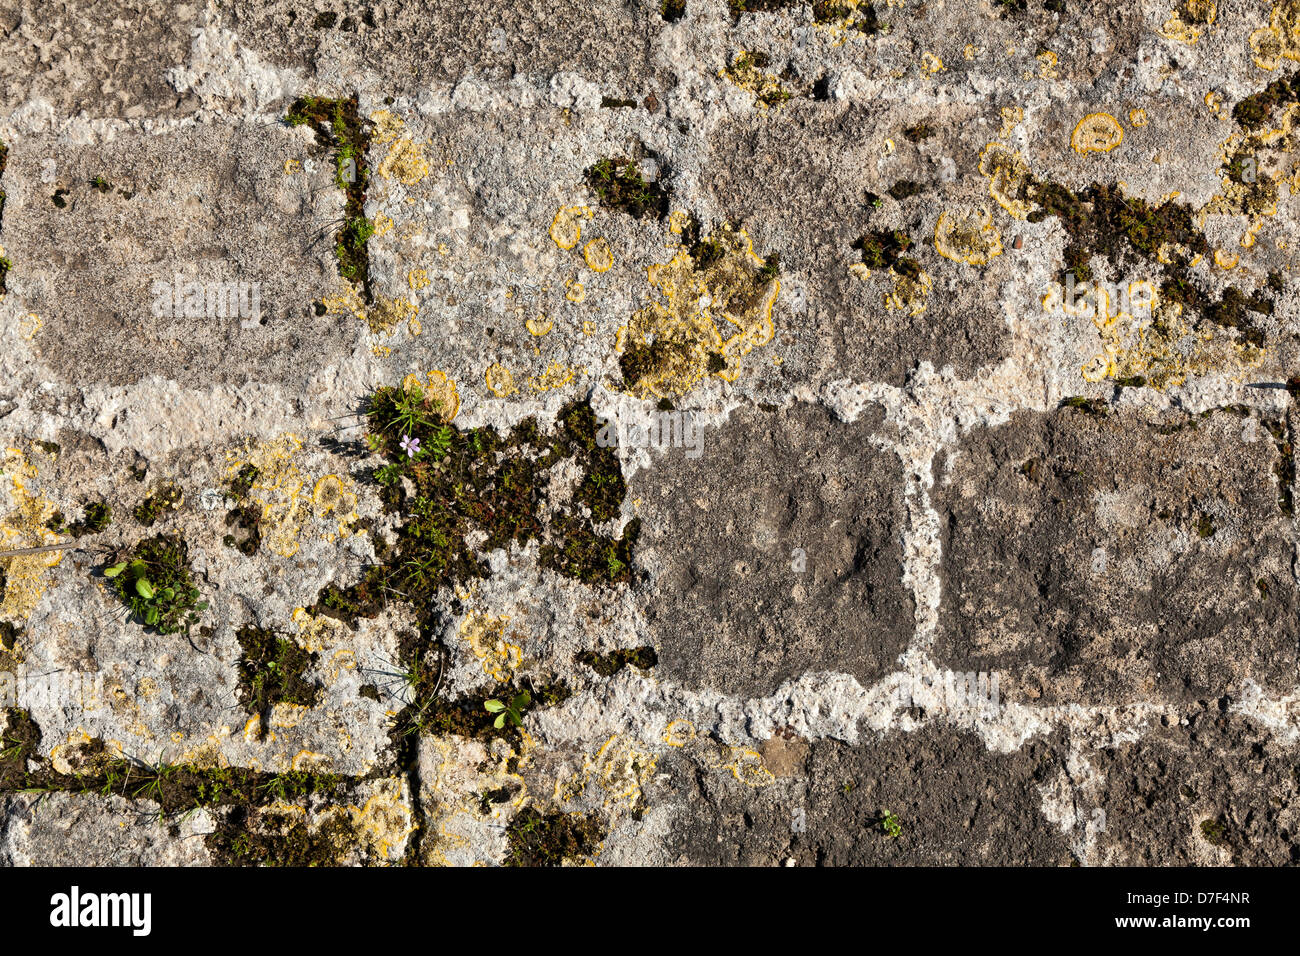 Close up of an ancient stone wall partially covered with algae and vegetation. Stock Photo